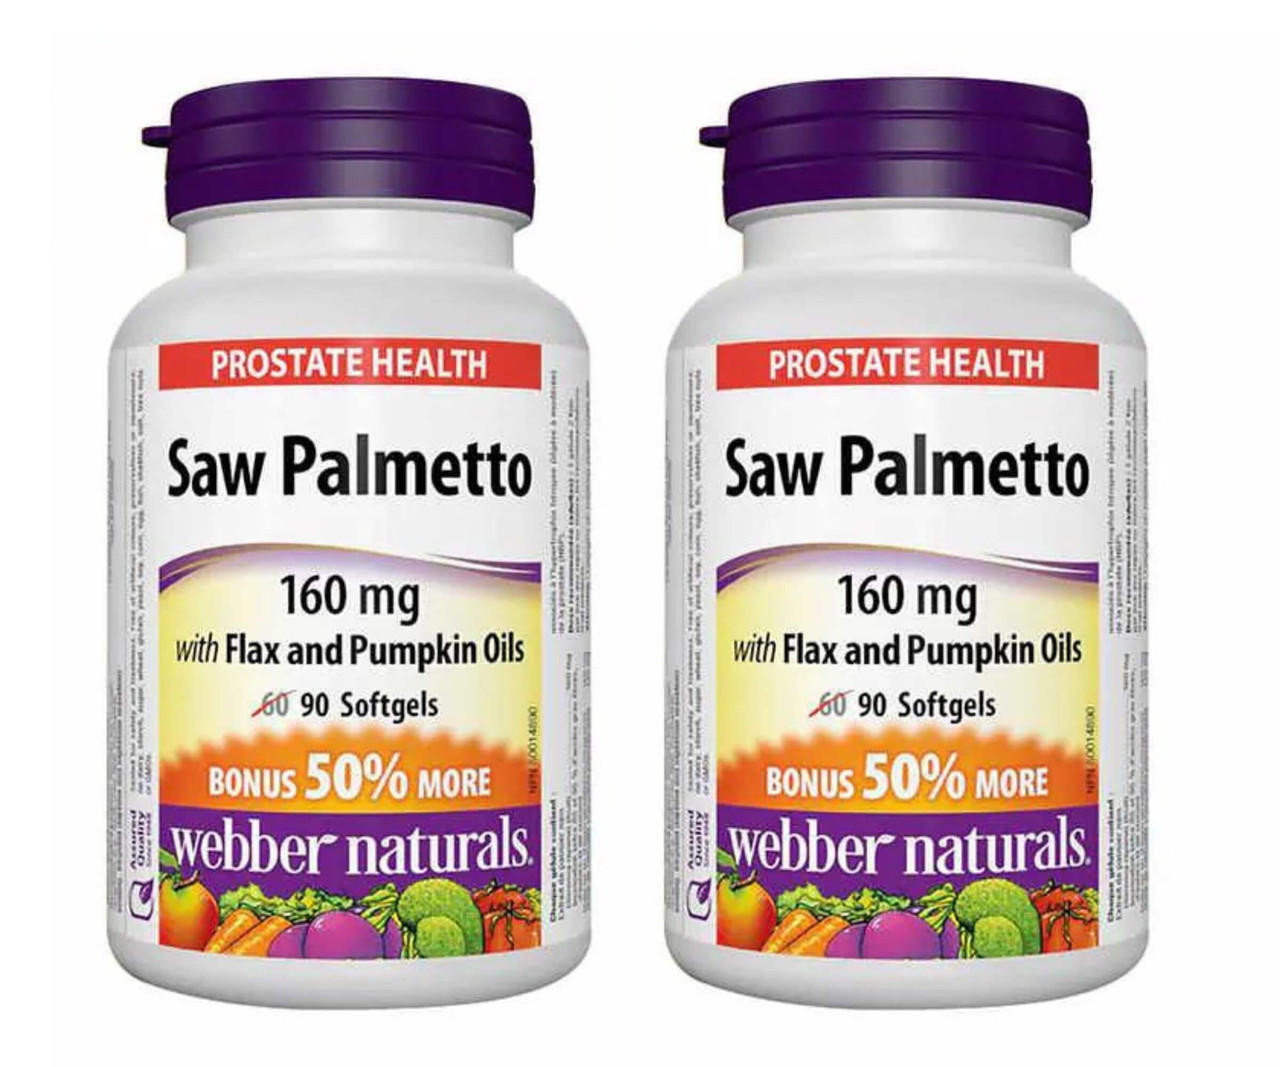 webber naturals Webber Naturals Saw Palmetto Extract 160mg - 2 x 90 Softgels | Prostate Health Support 